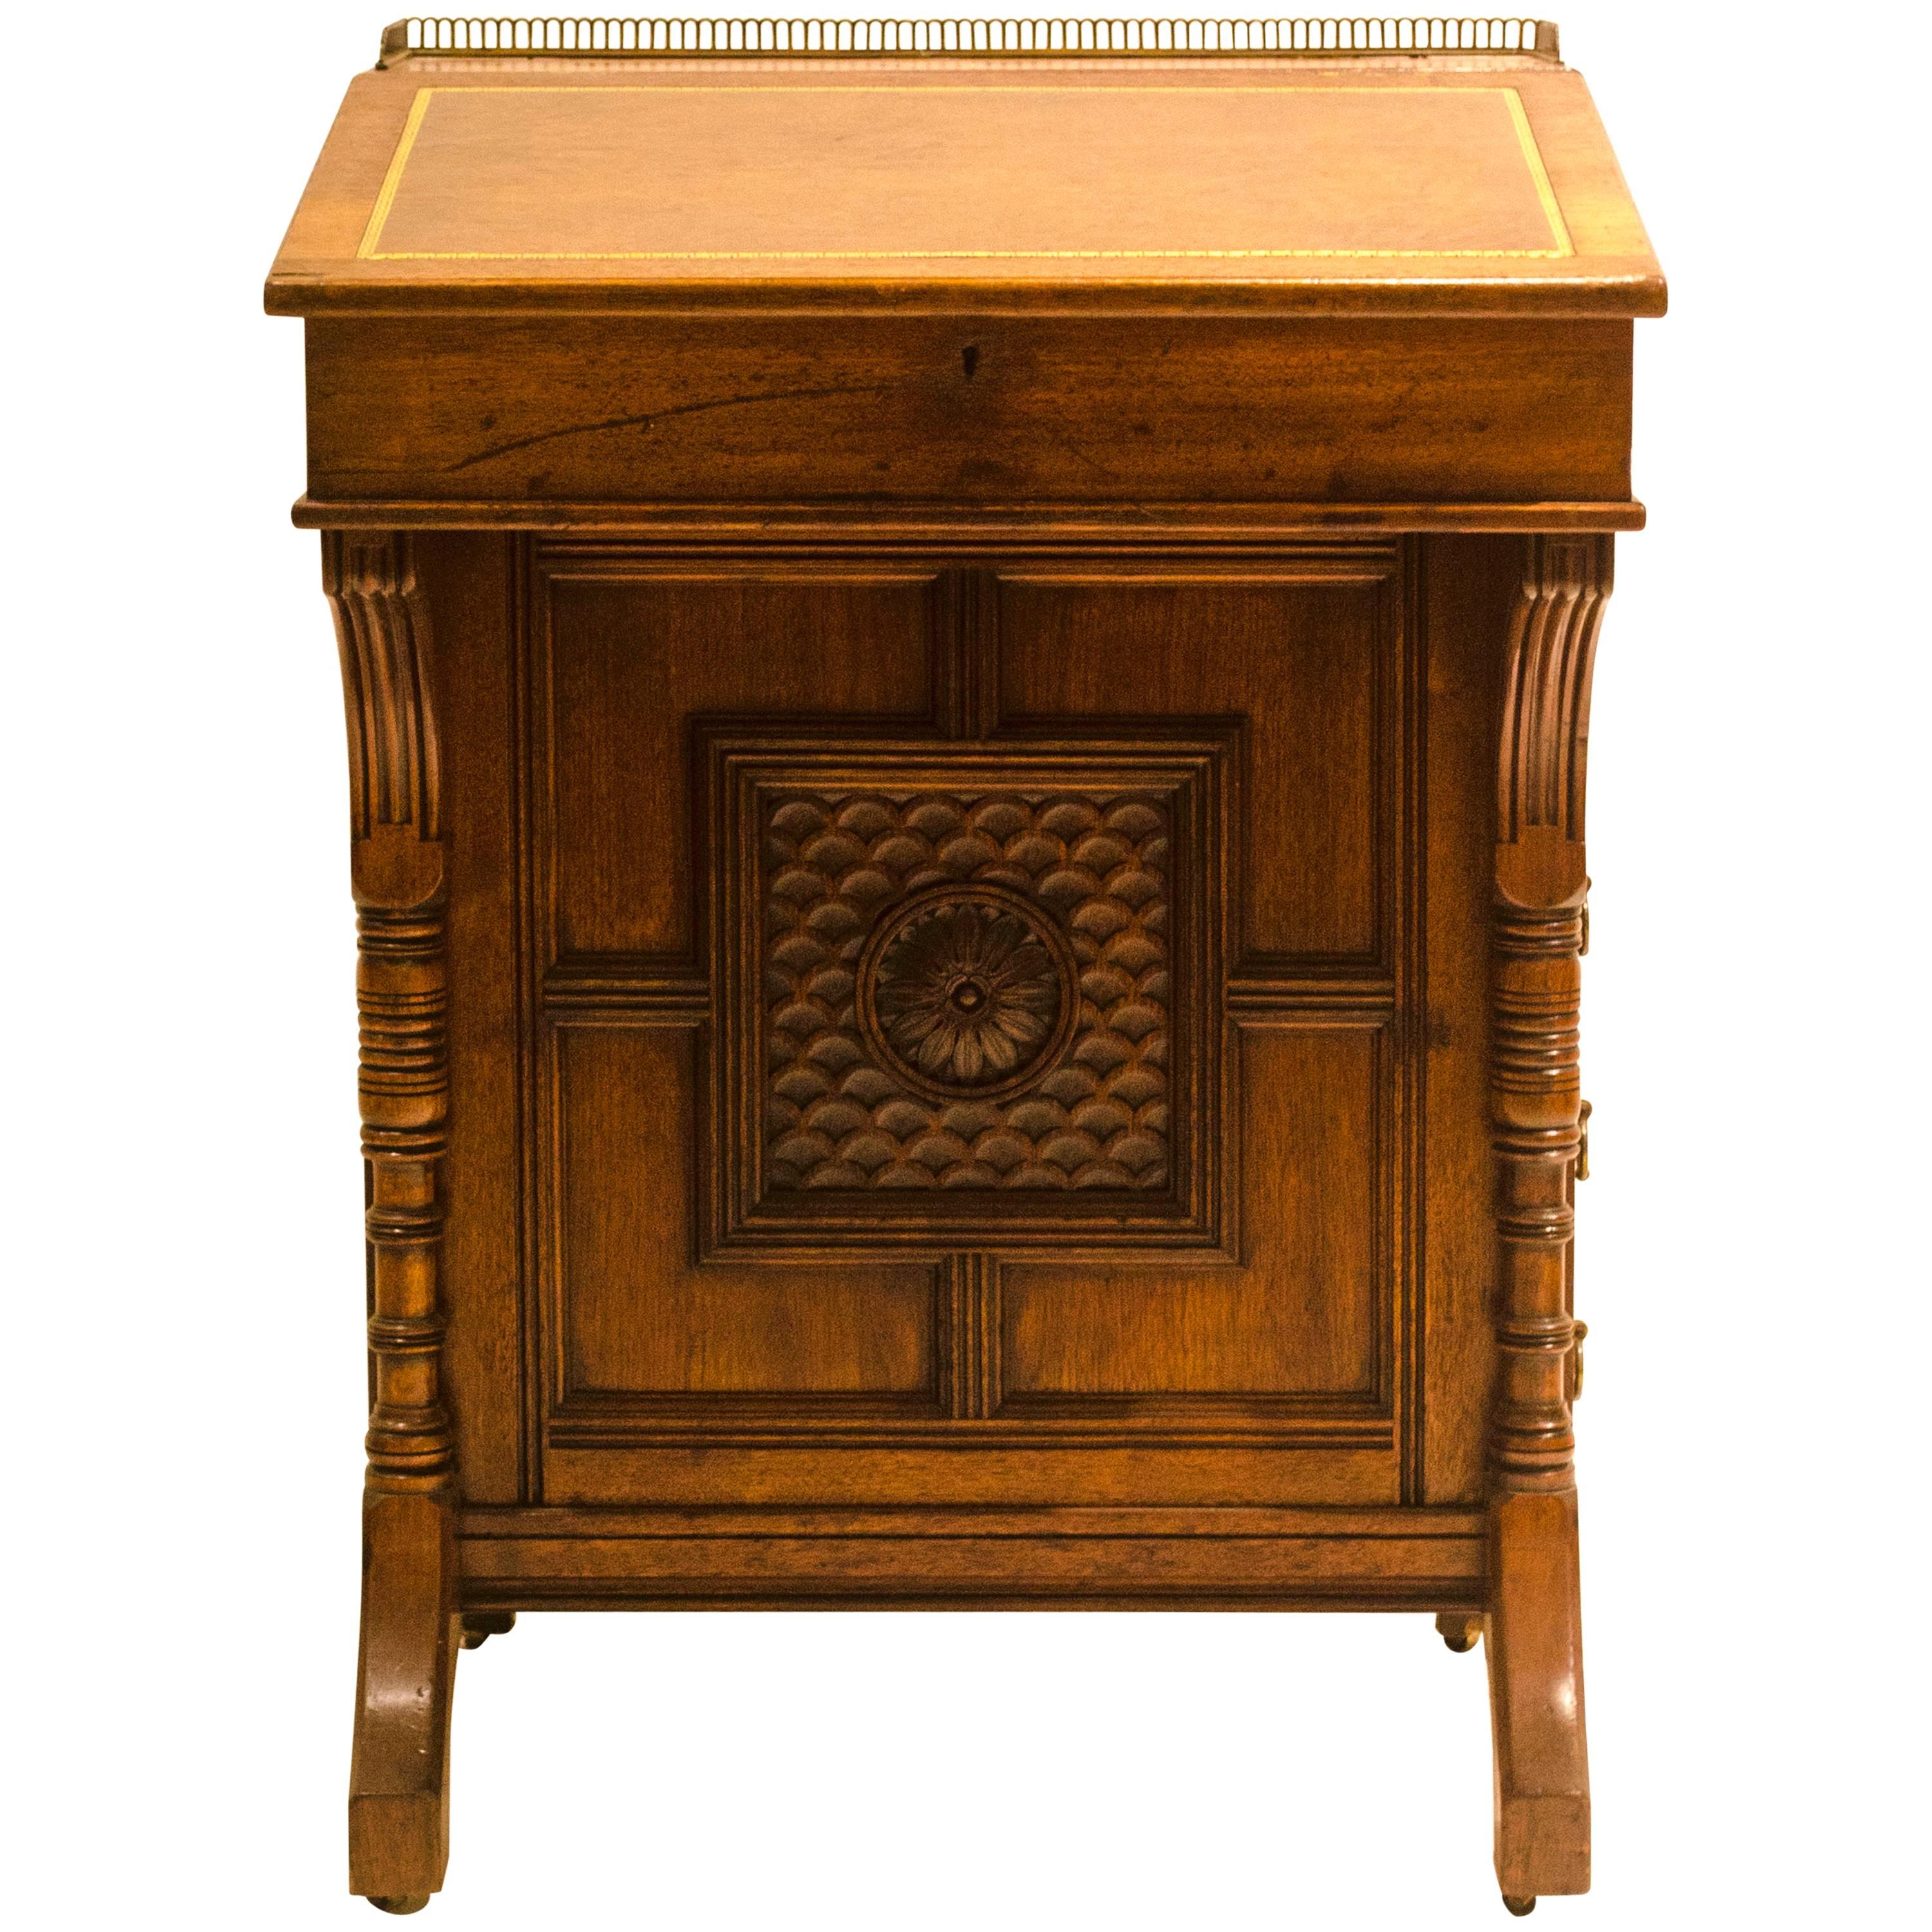 B Talbert for Gillows Aesthetic Movement Davenport with Central Carved Rosette